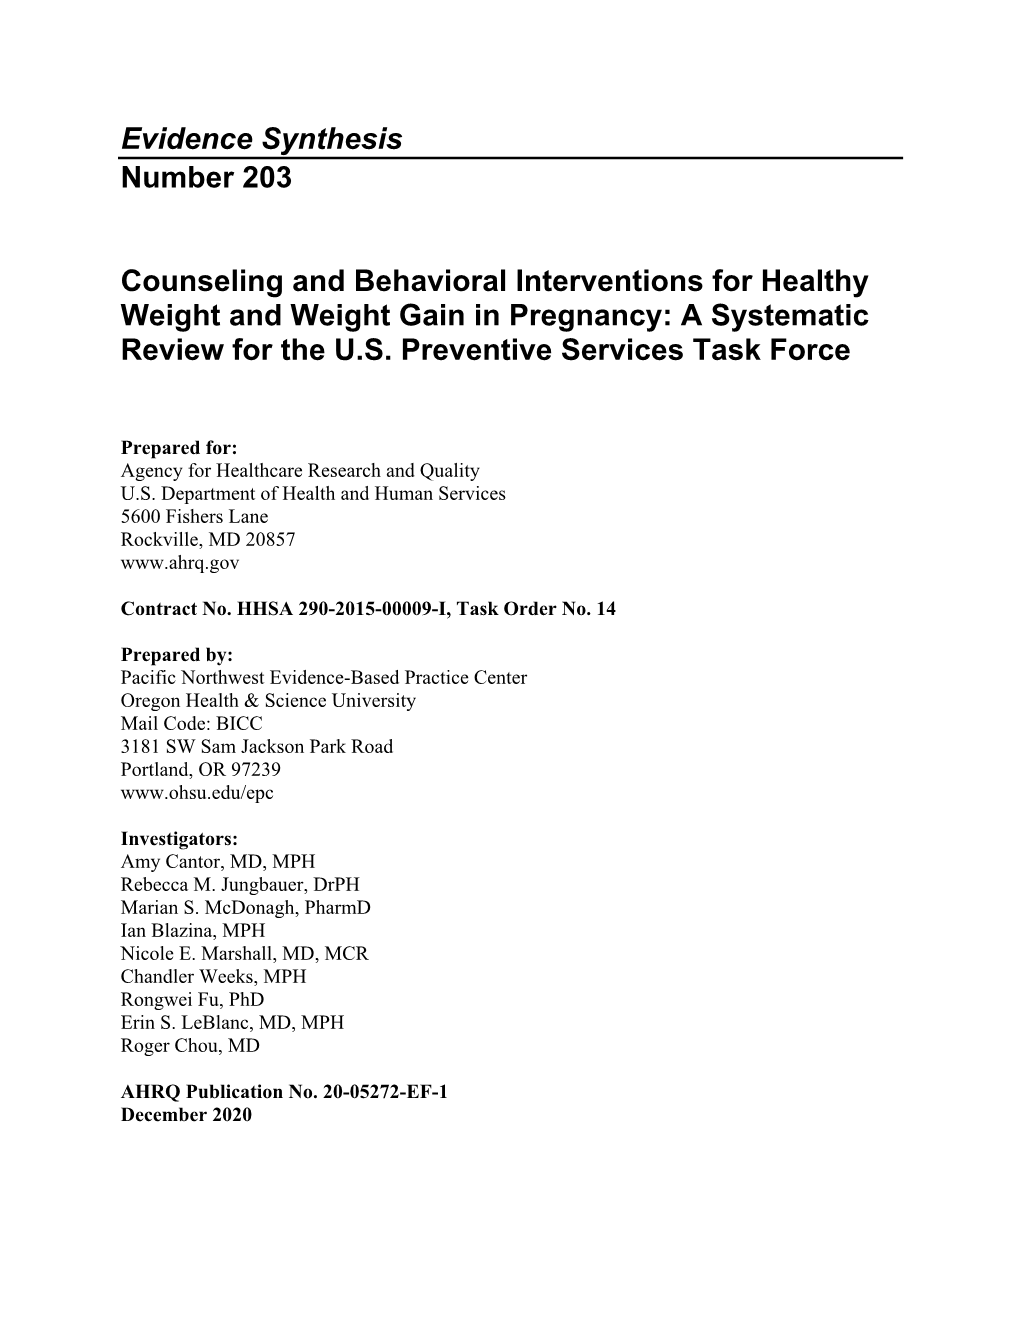 Counseling and Behavioral Interventions for Healthy Weight and Weight Gain in Pregnancy: a Systematic Review for the U.S